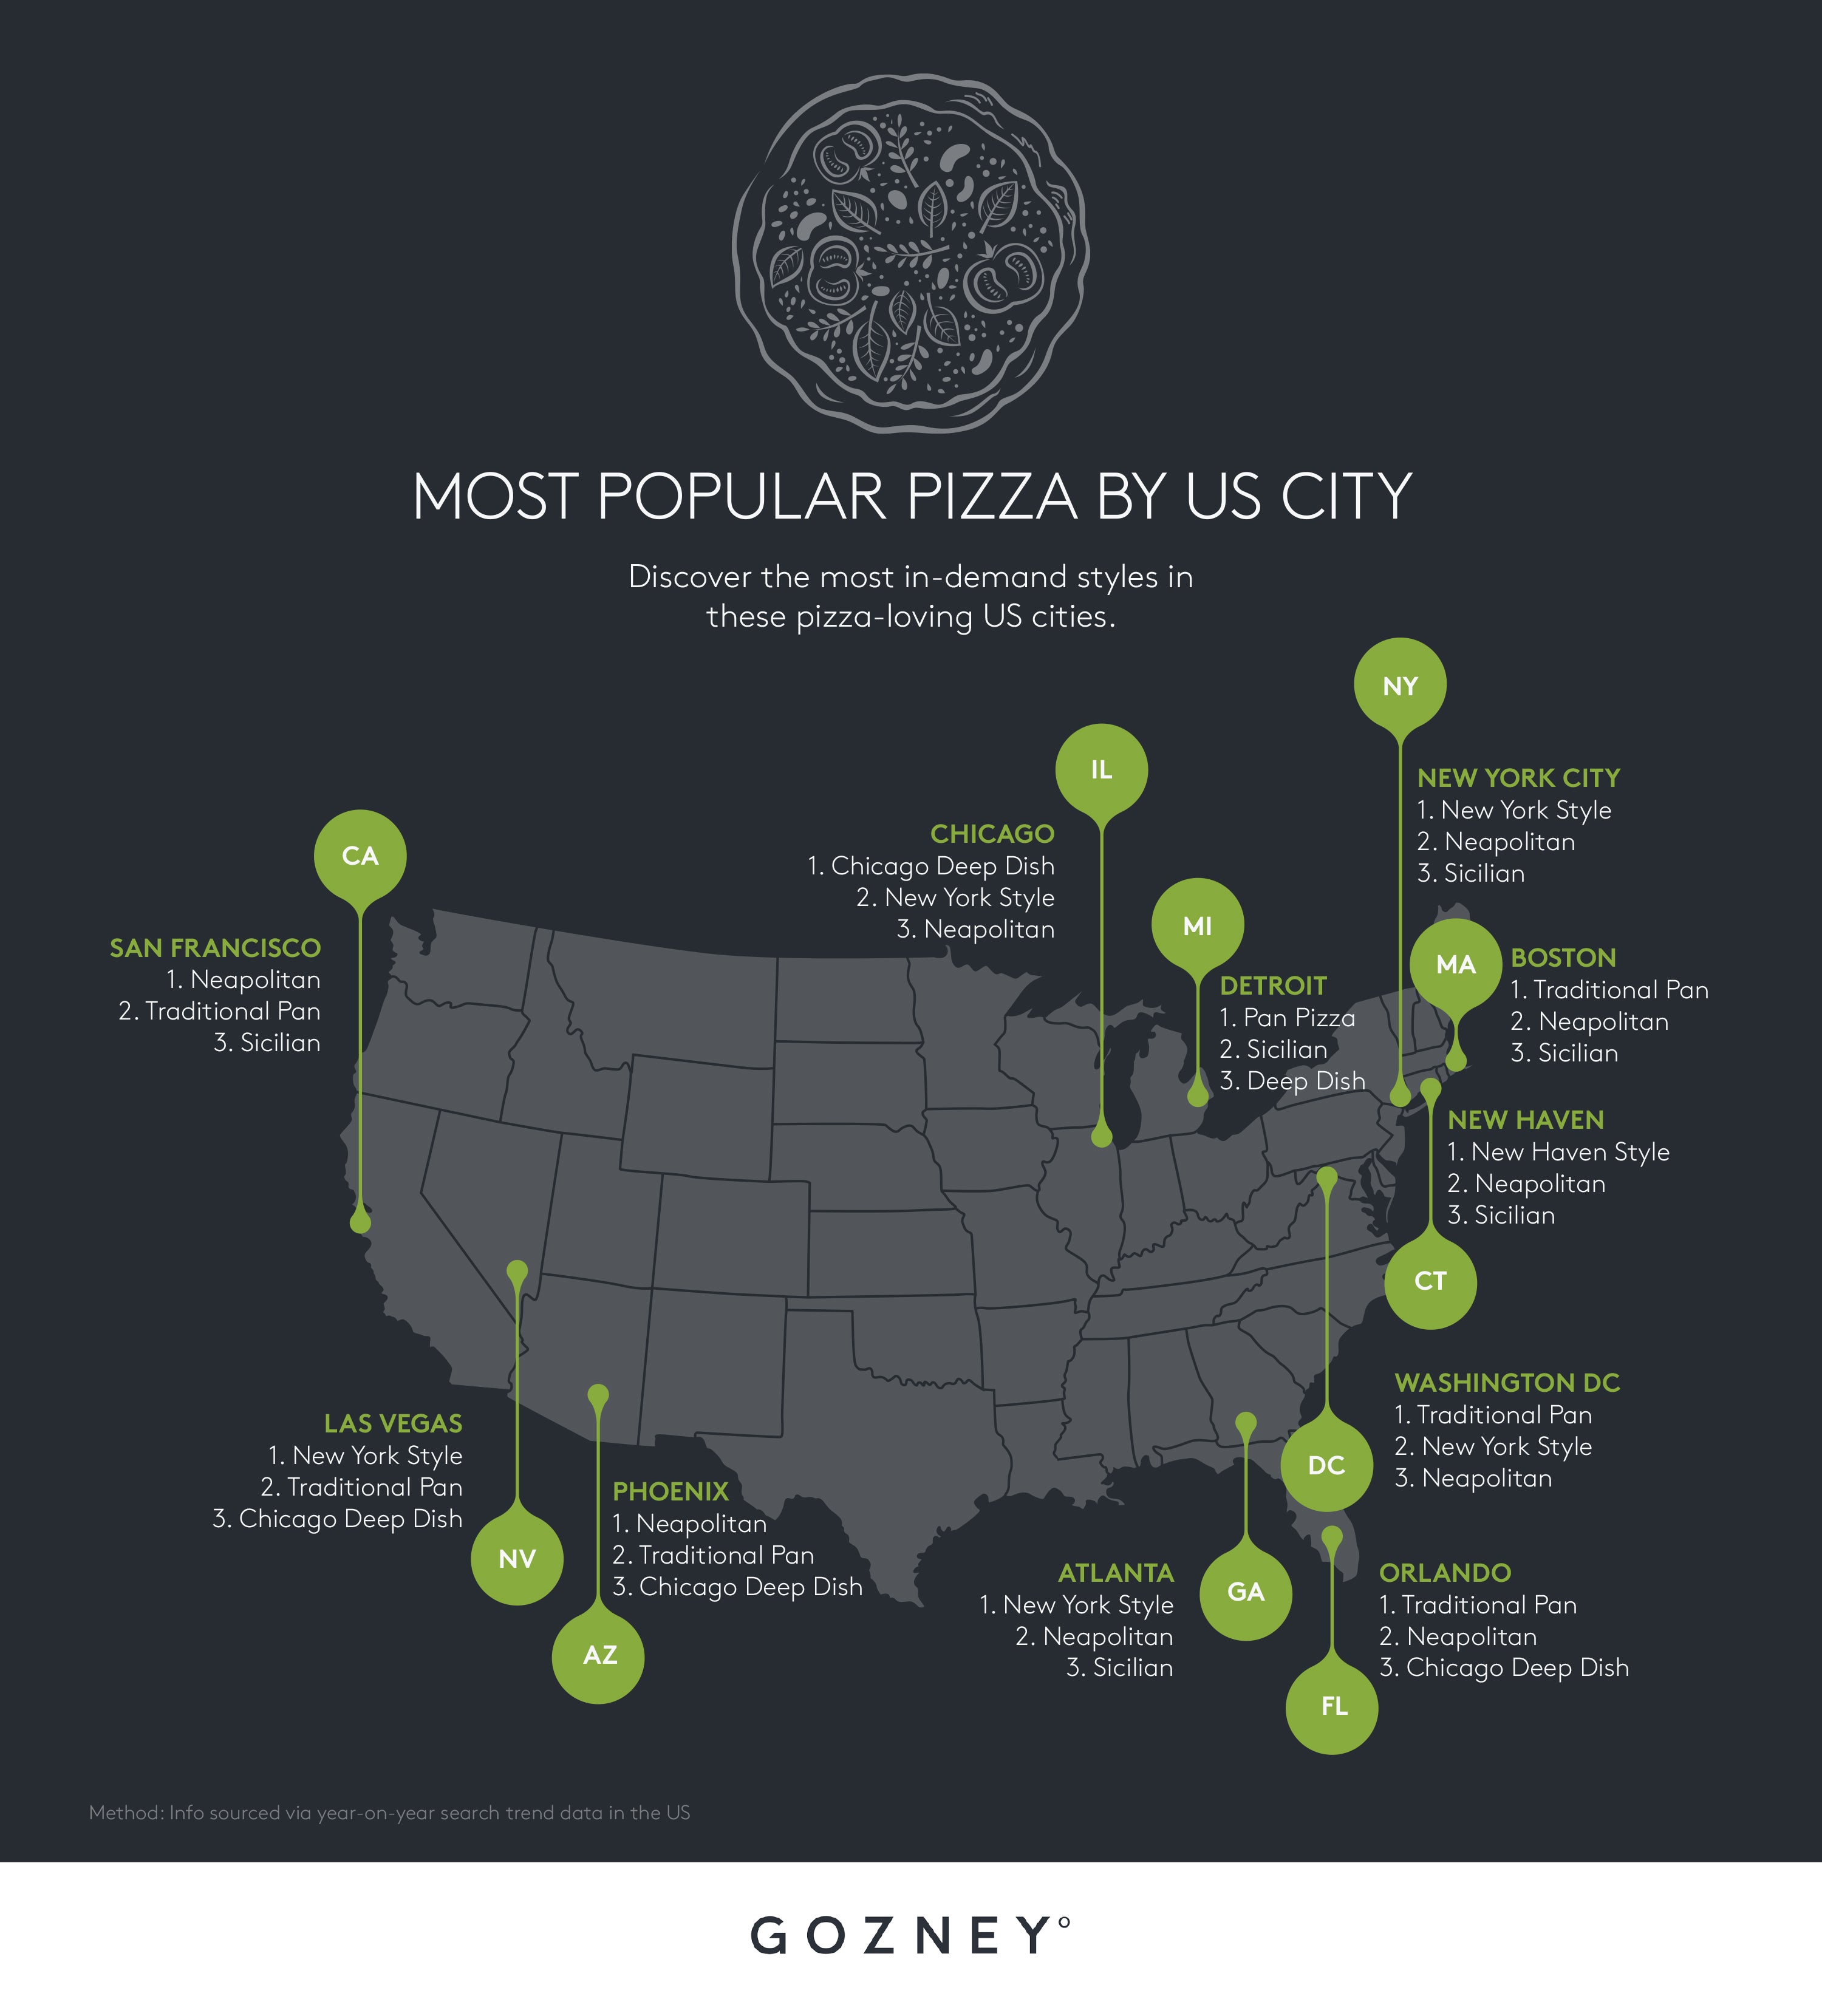 To pizza cities in the US